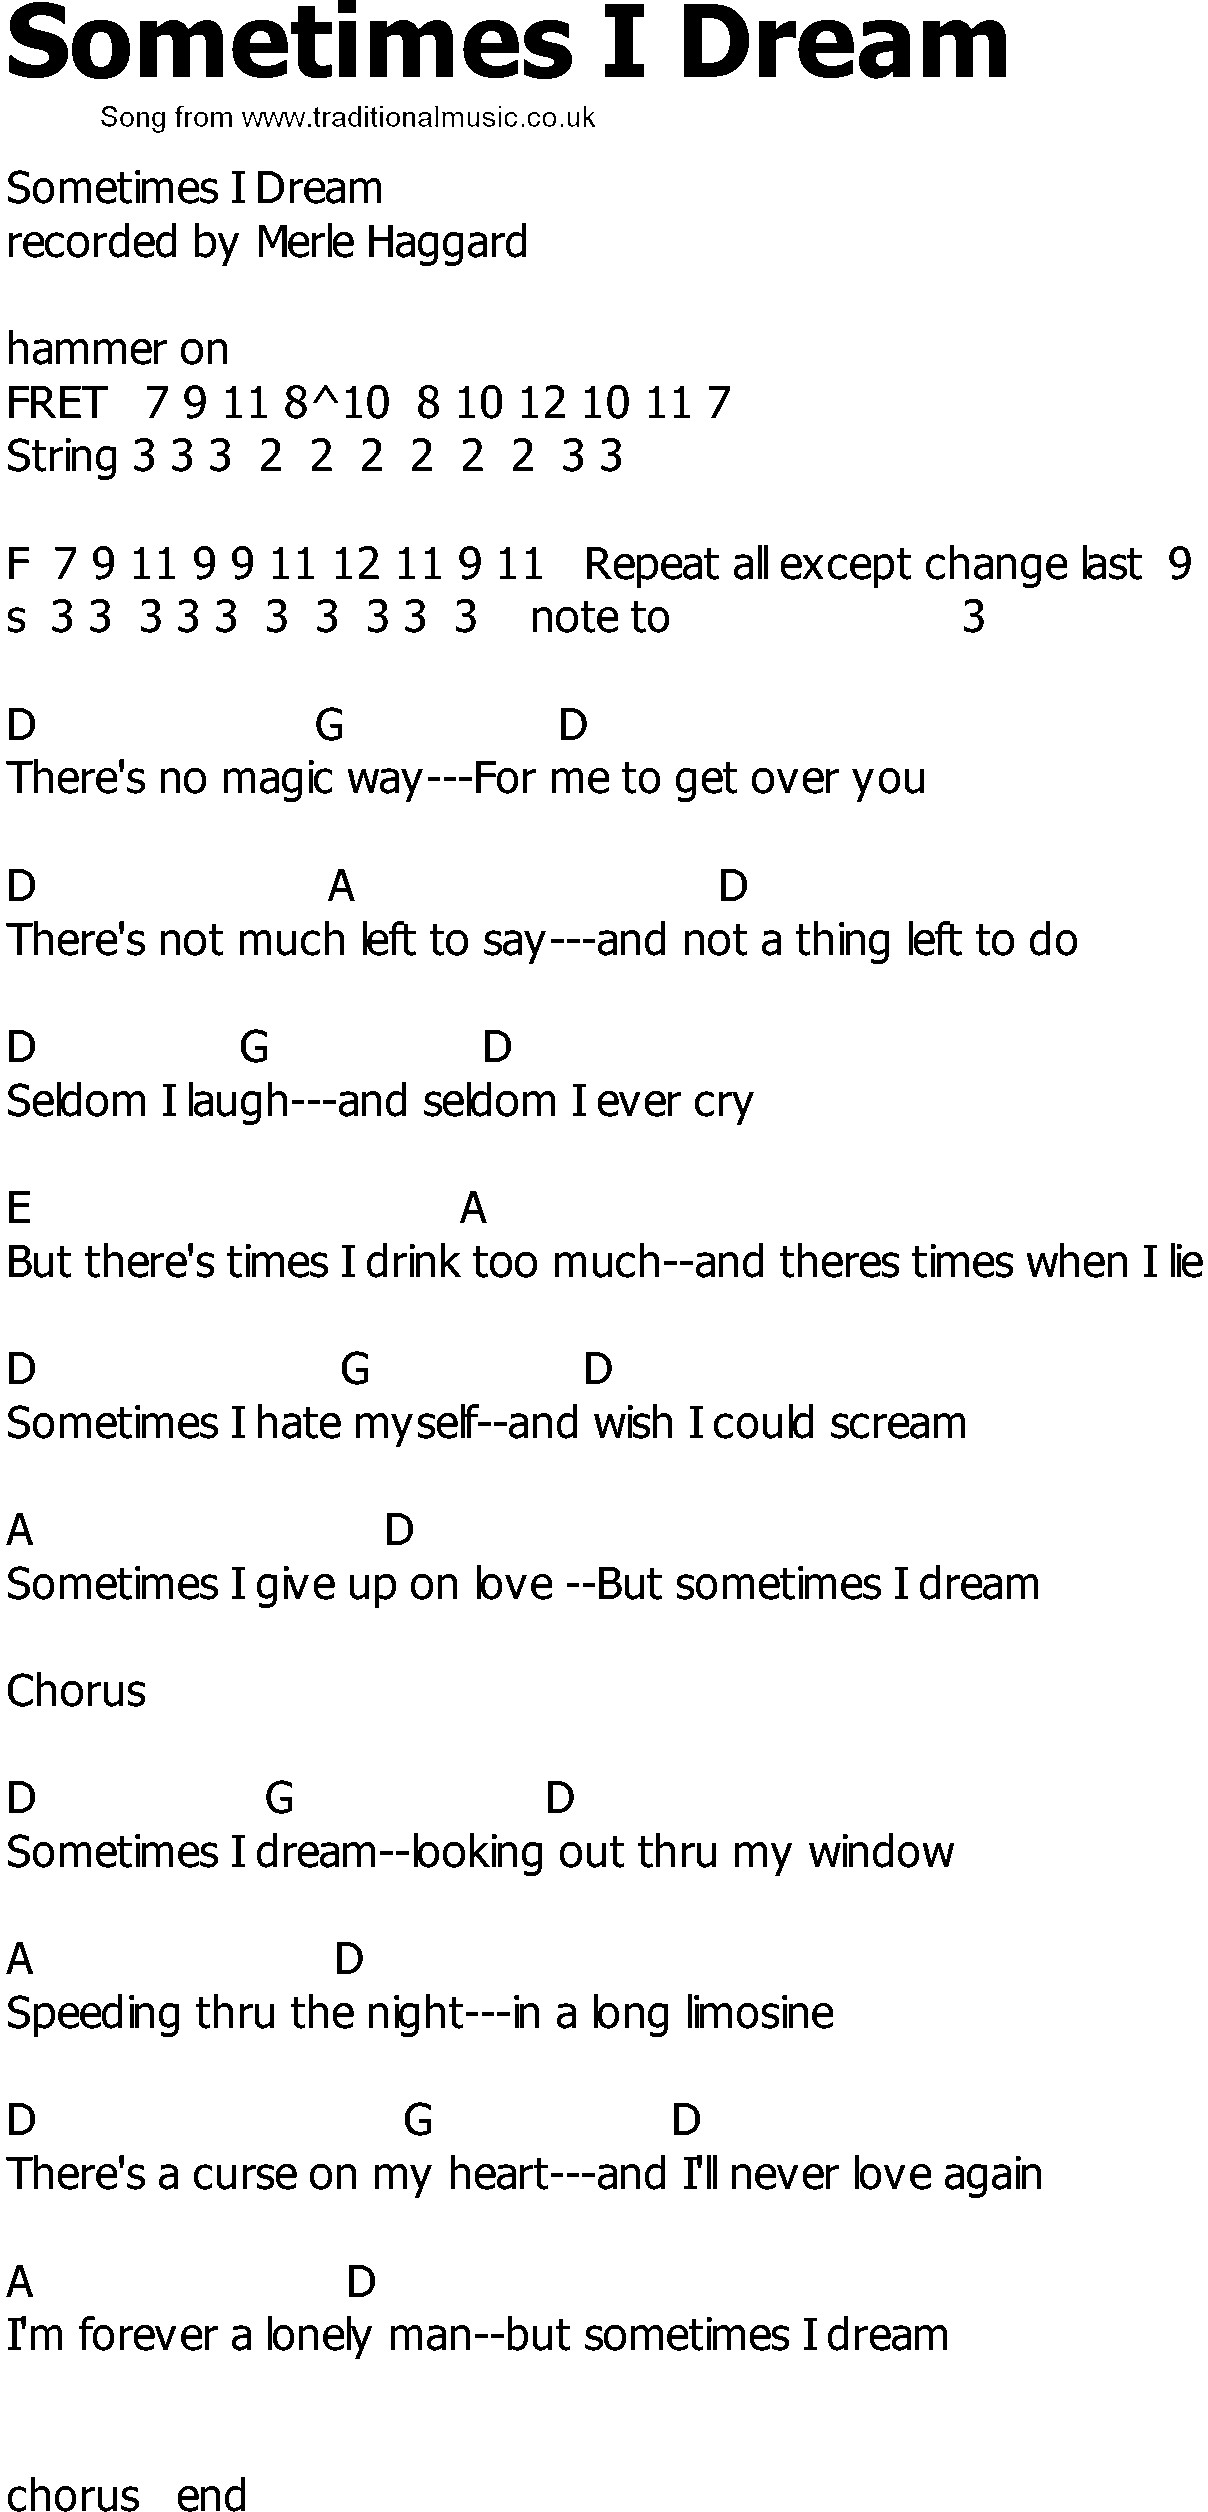 Old Country song lyrics with chords - Sometimes I Dream